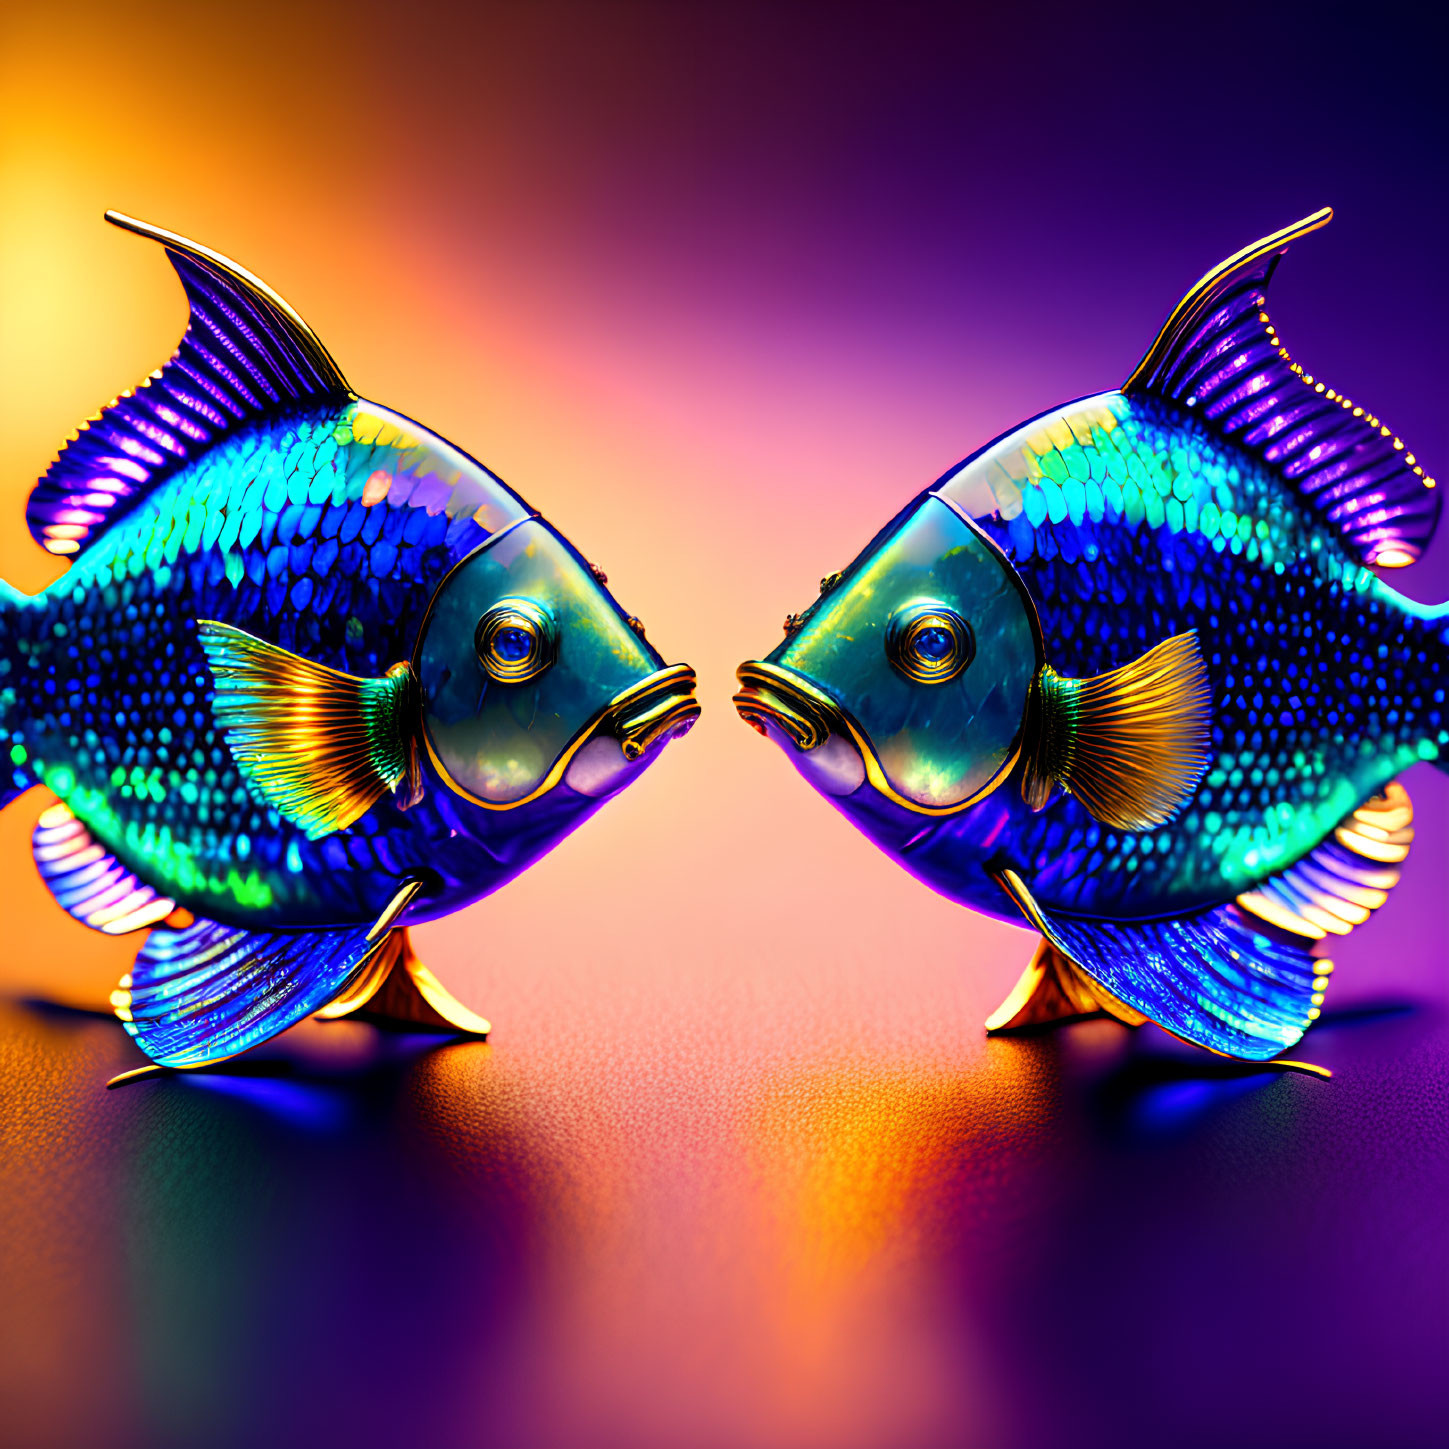 Iridescent Fish on Vibrant Gradient Background with Symmetrical Reflection